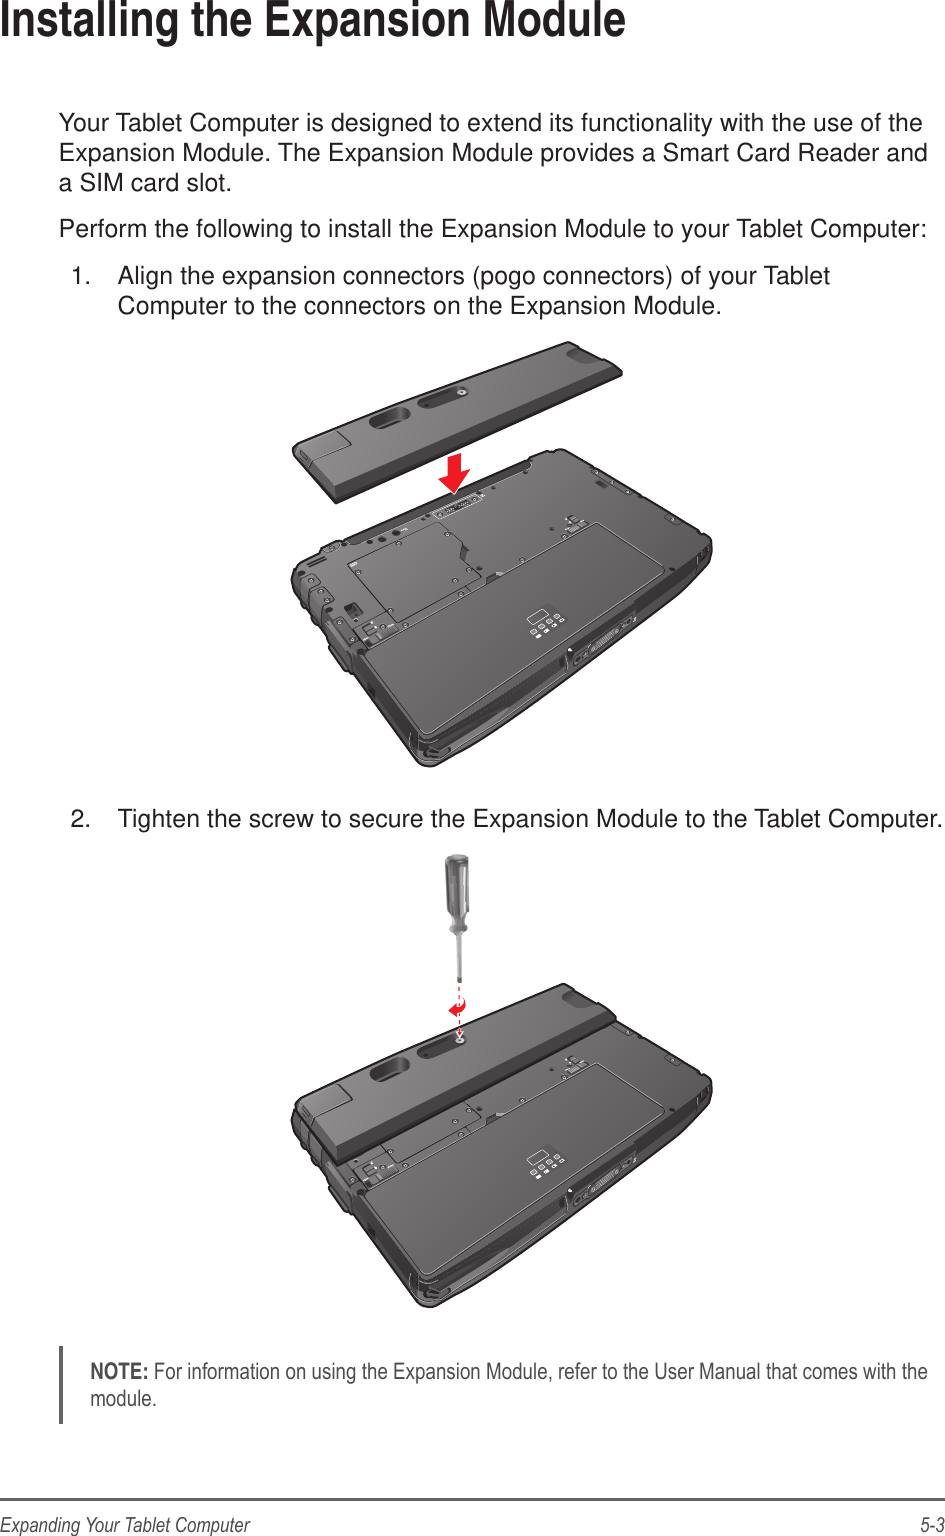 5-3Expanding Your Tablet ComputerInstalling the Expansion ModuleYour Tablet Computer is designed to extend its functionality with the use of the Expansion Module. The Expansion Module provides a Smart Card Reader and a SIM card slot.Perform the following to install the Expansion Module to your Tablet Computer:1.  Align the expansion connectors (pogo connectors) of your Tablet Computer to the connectors on the Expansion Module.2.  Tighten the screw to secure the Expansion Module to the Tablet Computer.NOTE: For information on using the Expansion Module, refer to the User Manual that comes with the module.